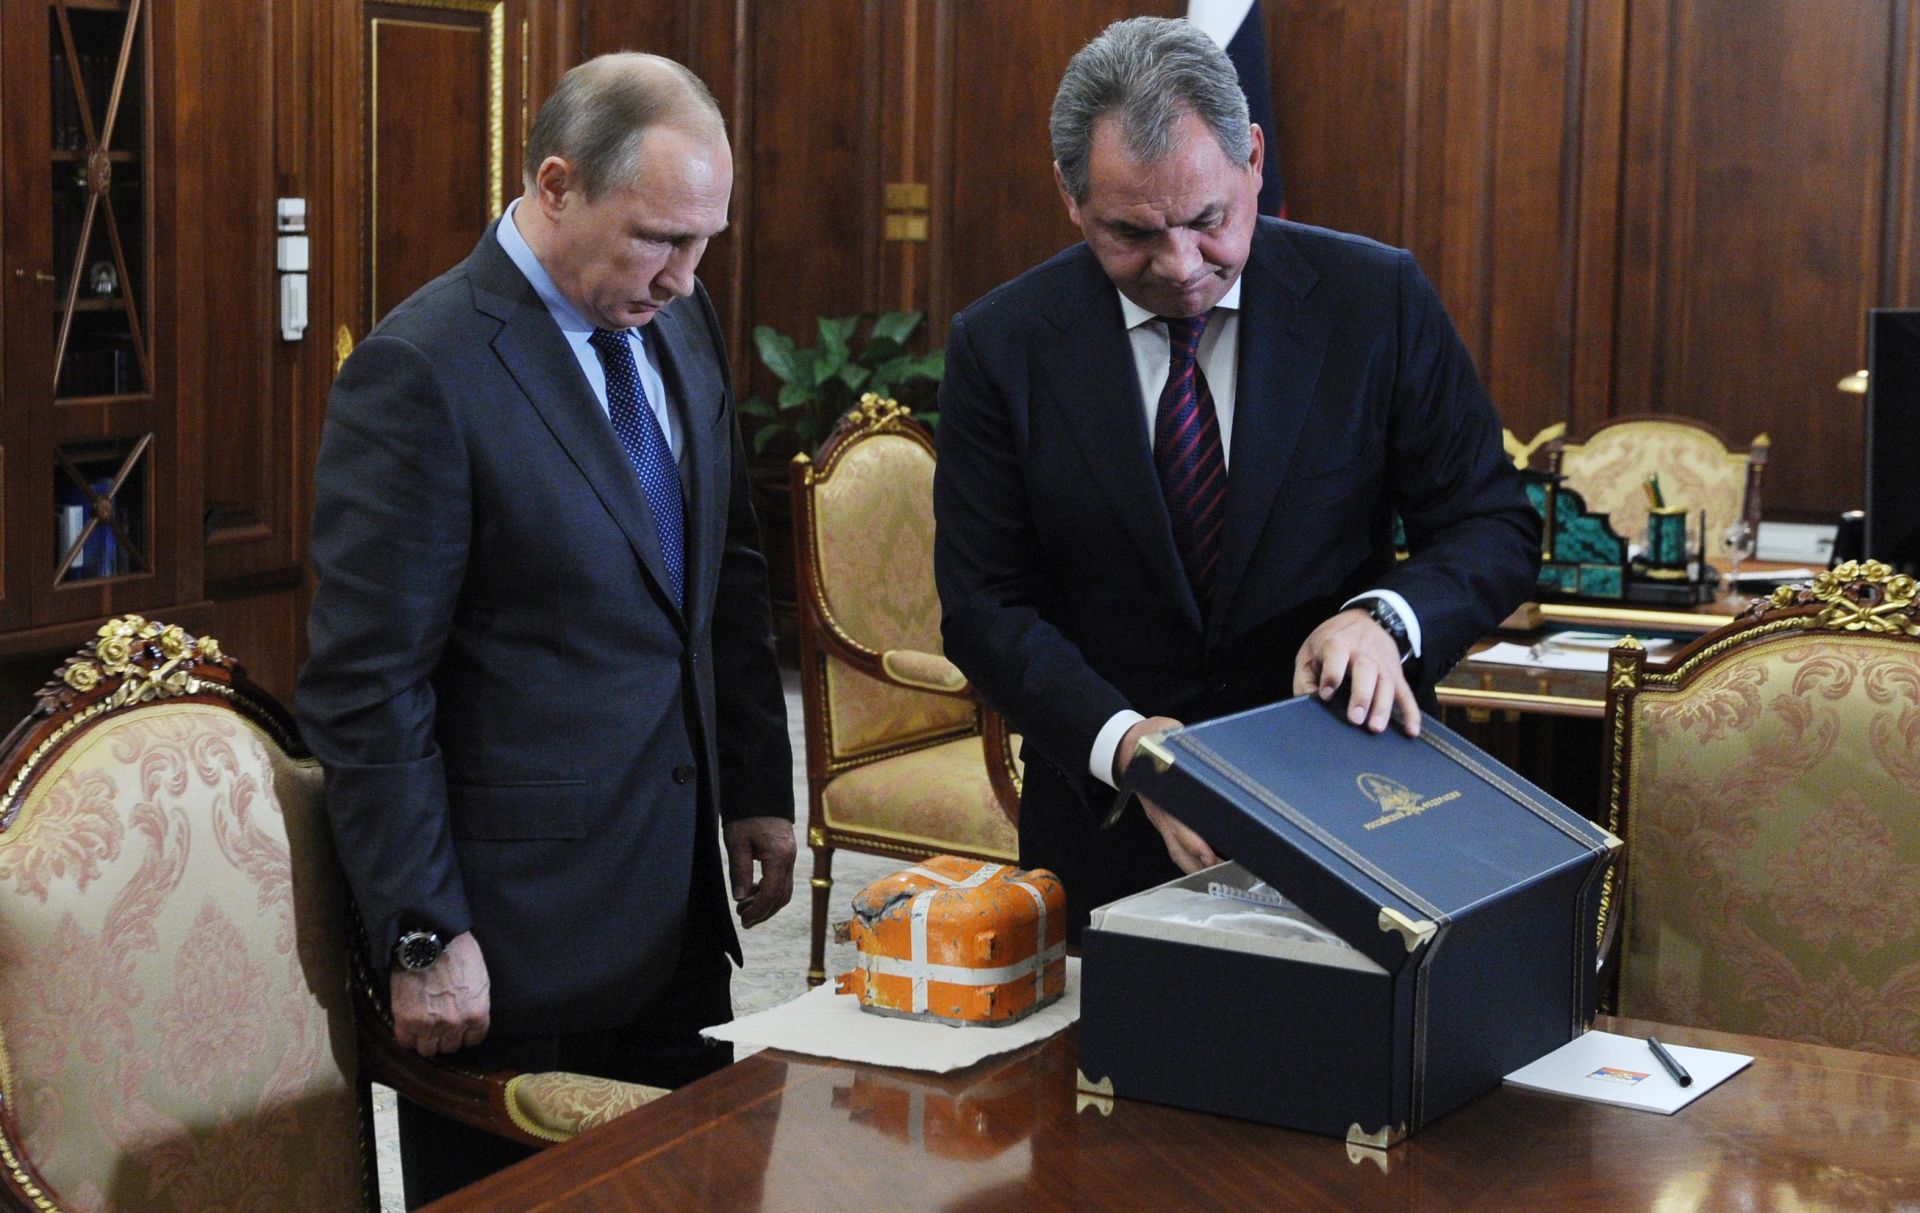 epa05060298 Russian Defense Minister Sergei Shoigu (R) introduces to Russian President Vladimir Putin (L) a flight recorder of Russian SU-24 bomber, downed in Syria by Turkish F-16 fighter, during their meeting in Novo-Ogariovo residence outside Moscow, 08 December 2015. Vladimir Putin ordered to study all the data of the recorder, in collaboration with all interested foreign specialists.  EPA/MIKHAIL KLIMENTIEV/SPUTNIK/KREMLIN POOL